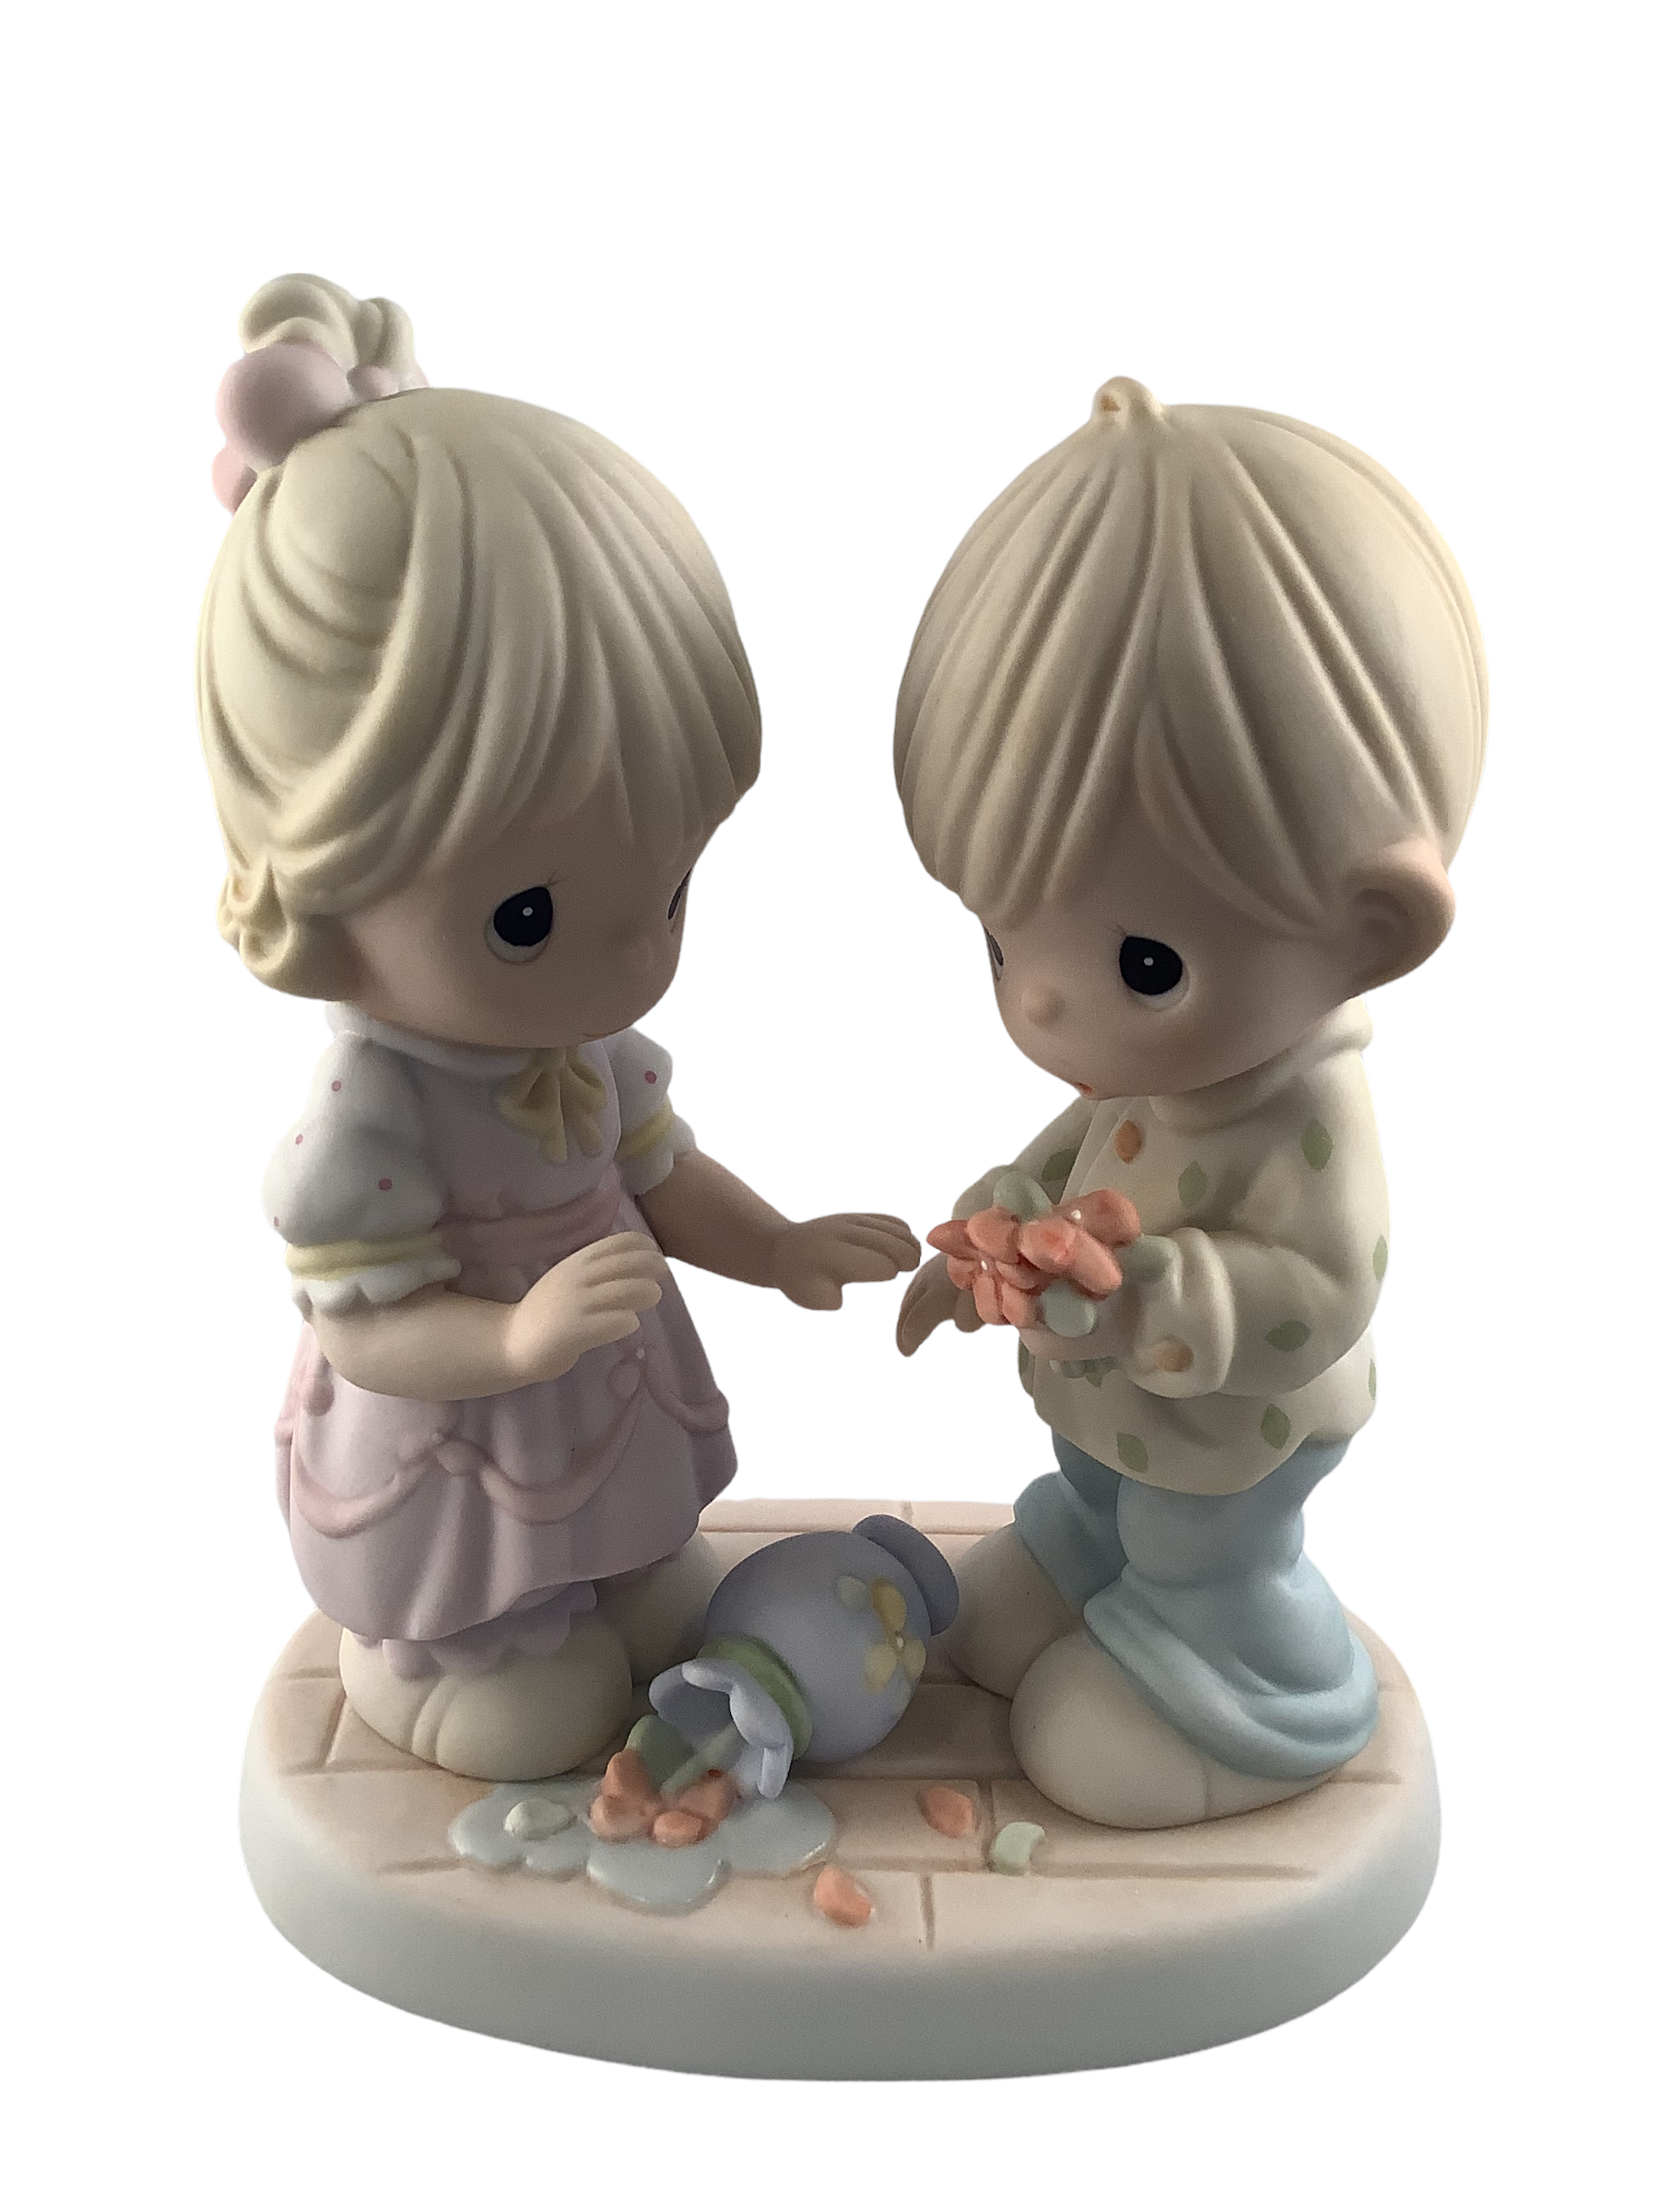 Our Love Can Never Be Broken - Precious Moment Figurine